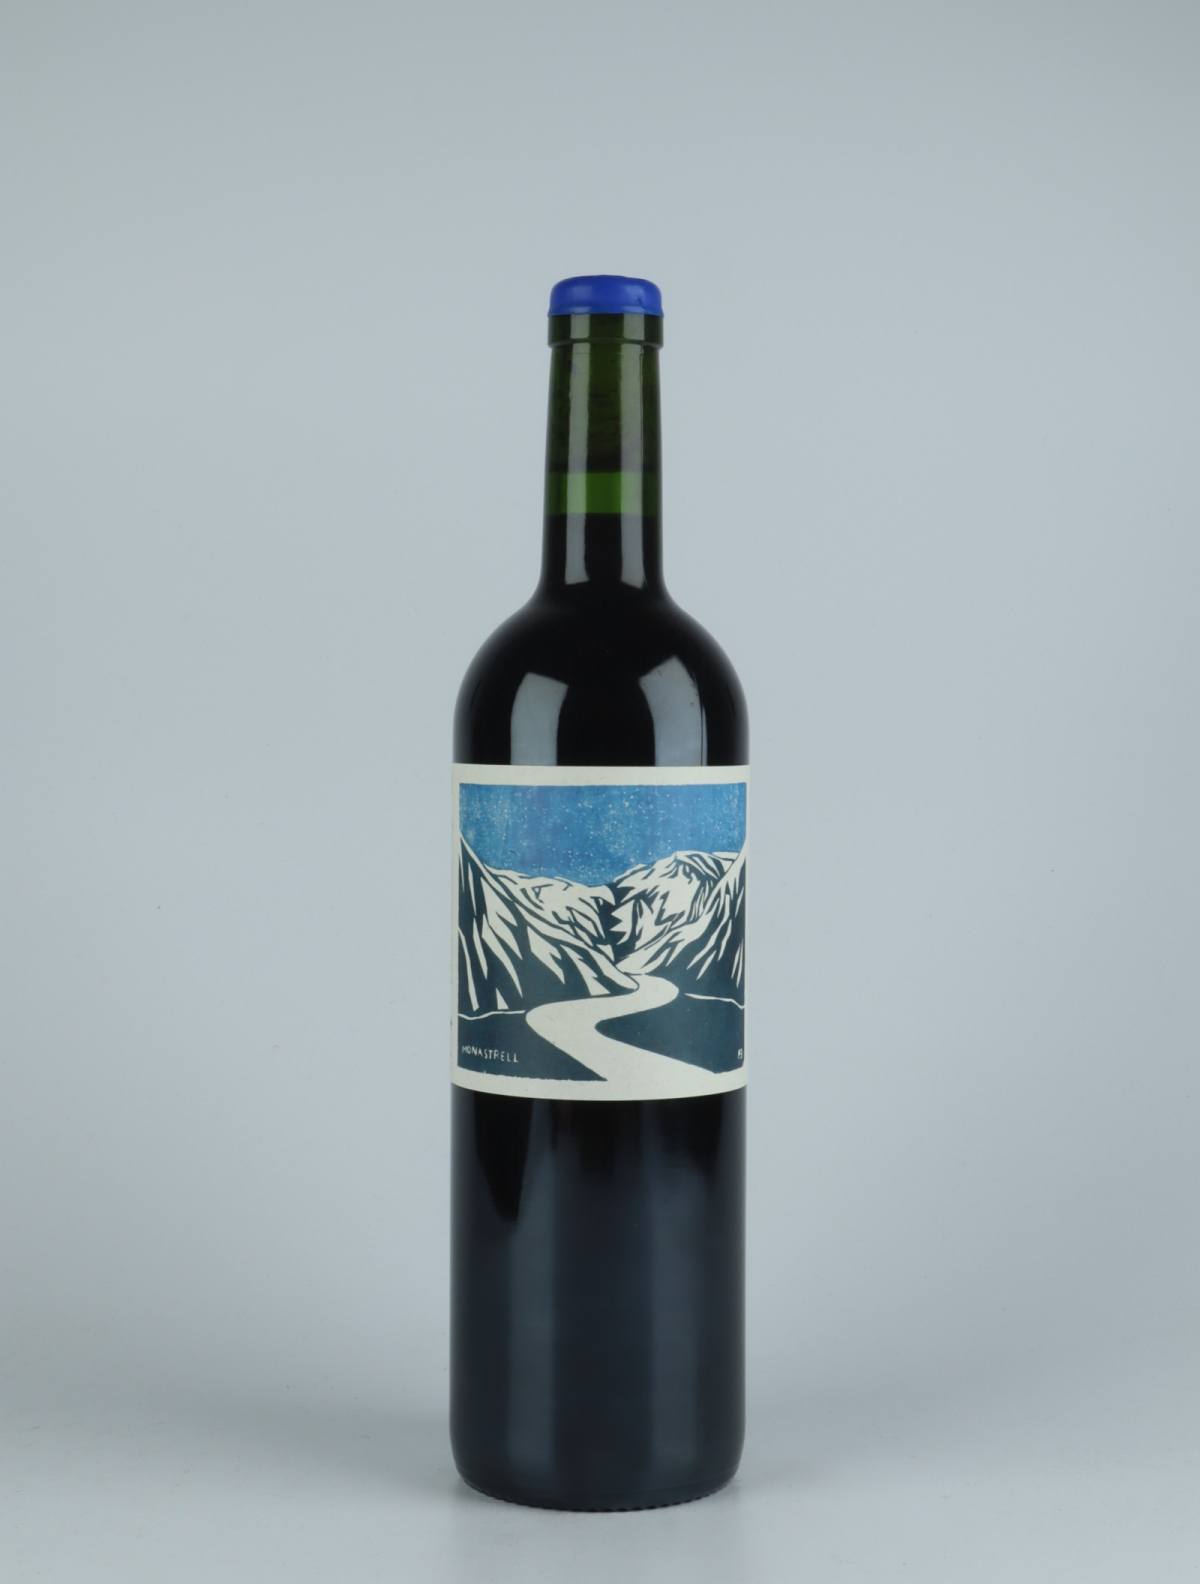 A bottle 2020 Transhumància Monastrell Red wine from Domaine Cotzé, Pyrenees in France